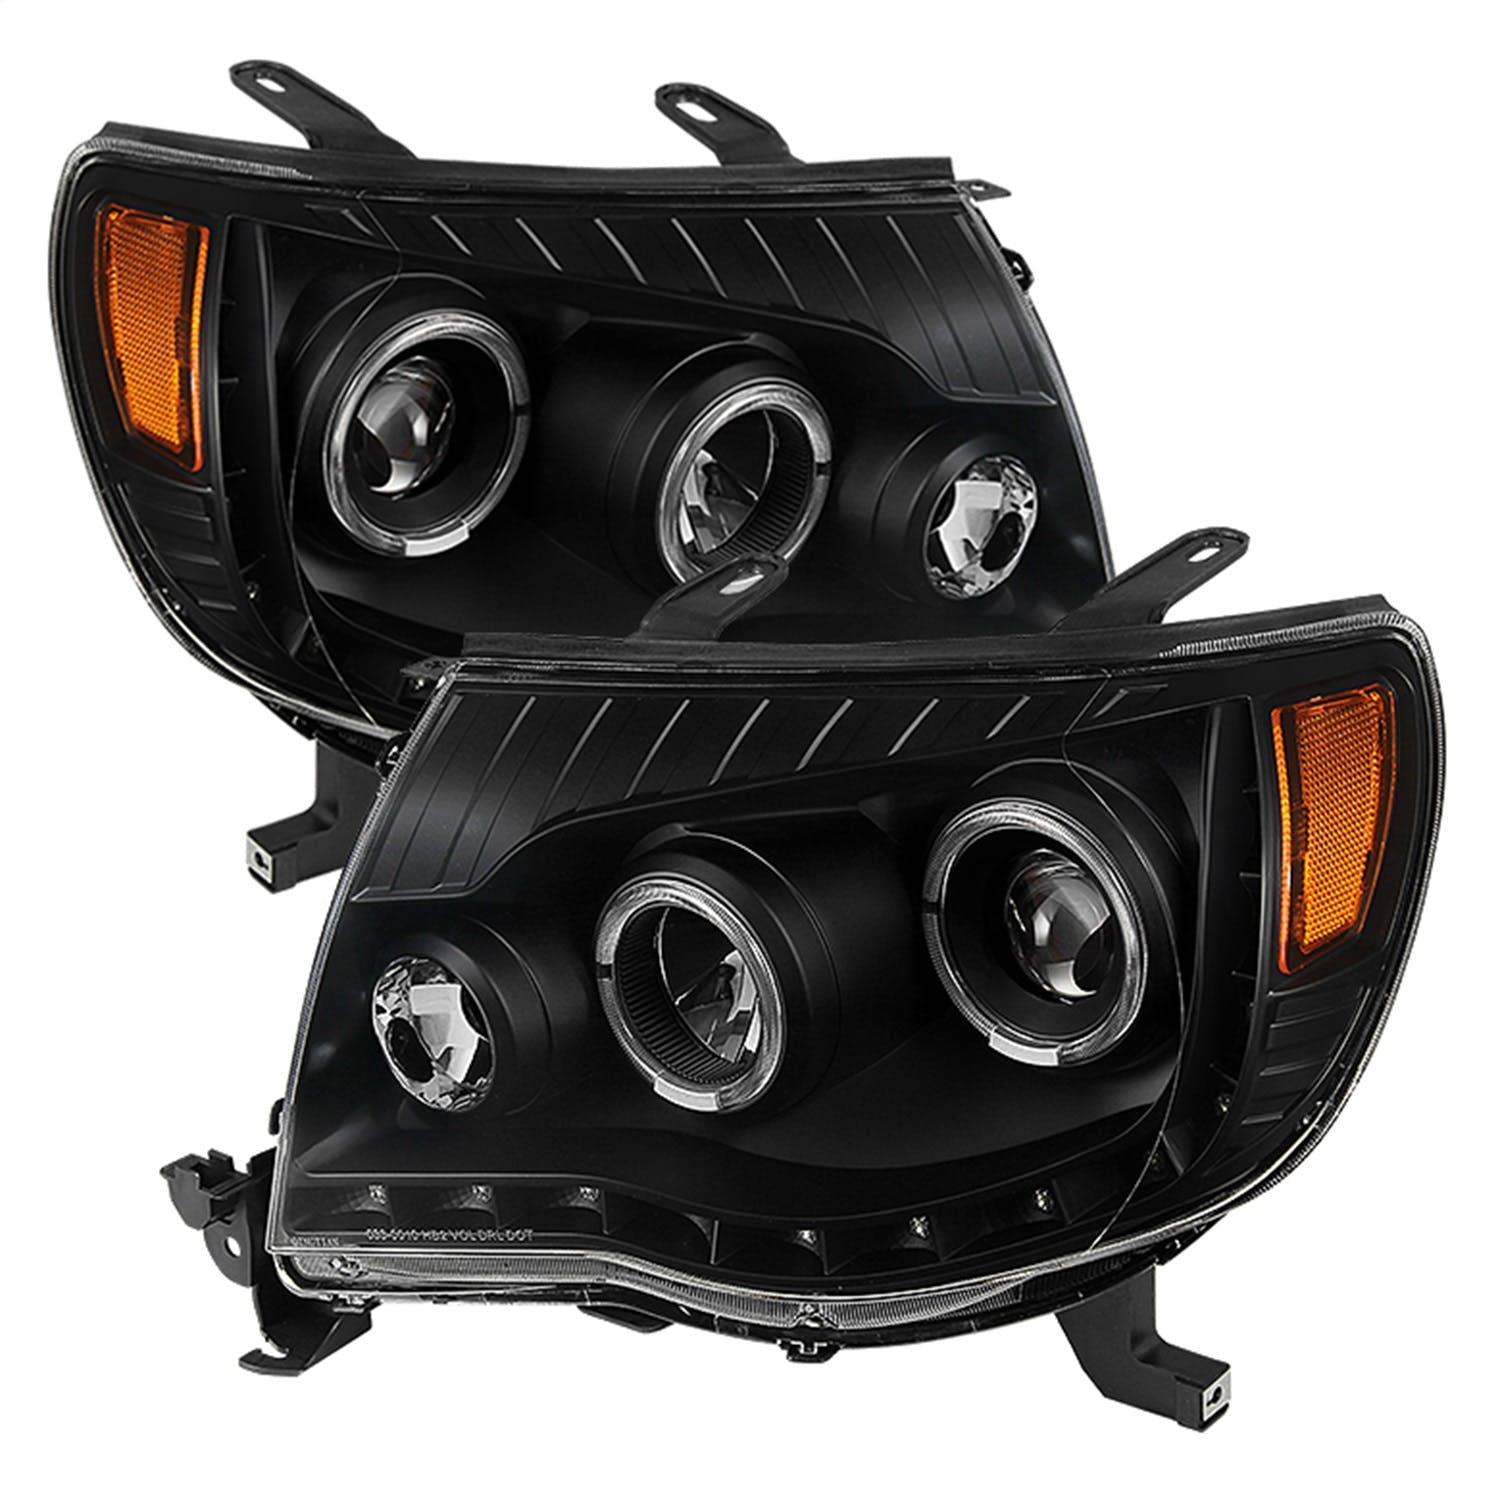 XTUNE POWER 9027857 Toyota Tacoma 05 11 Halo Projector Headlights Low Beam H1(Included) ; High Beam H1(Included) ; Signal 4157NA(Not Included) Black